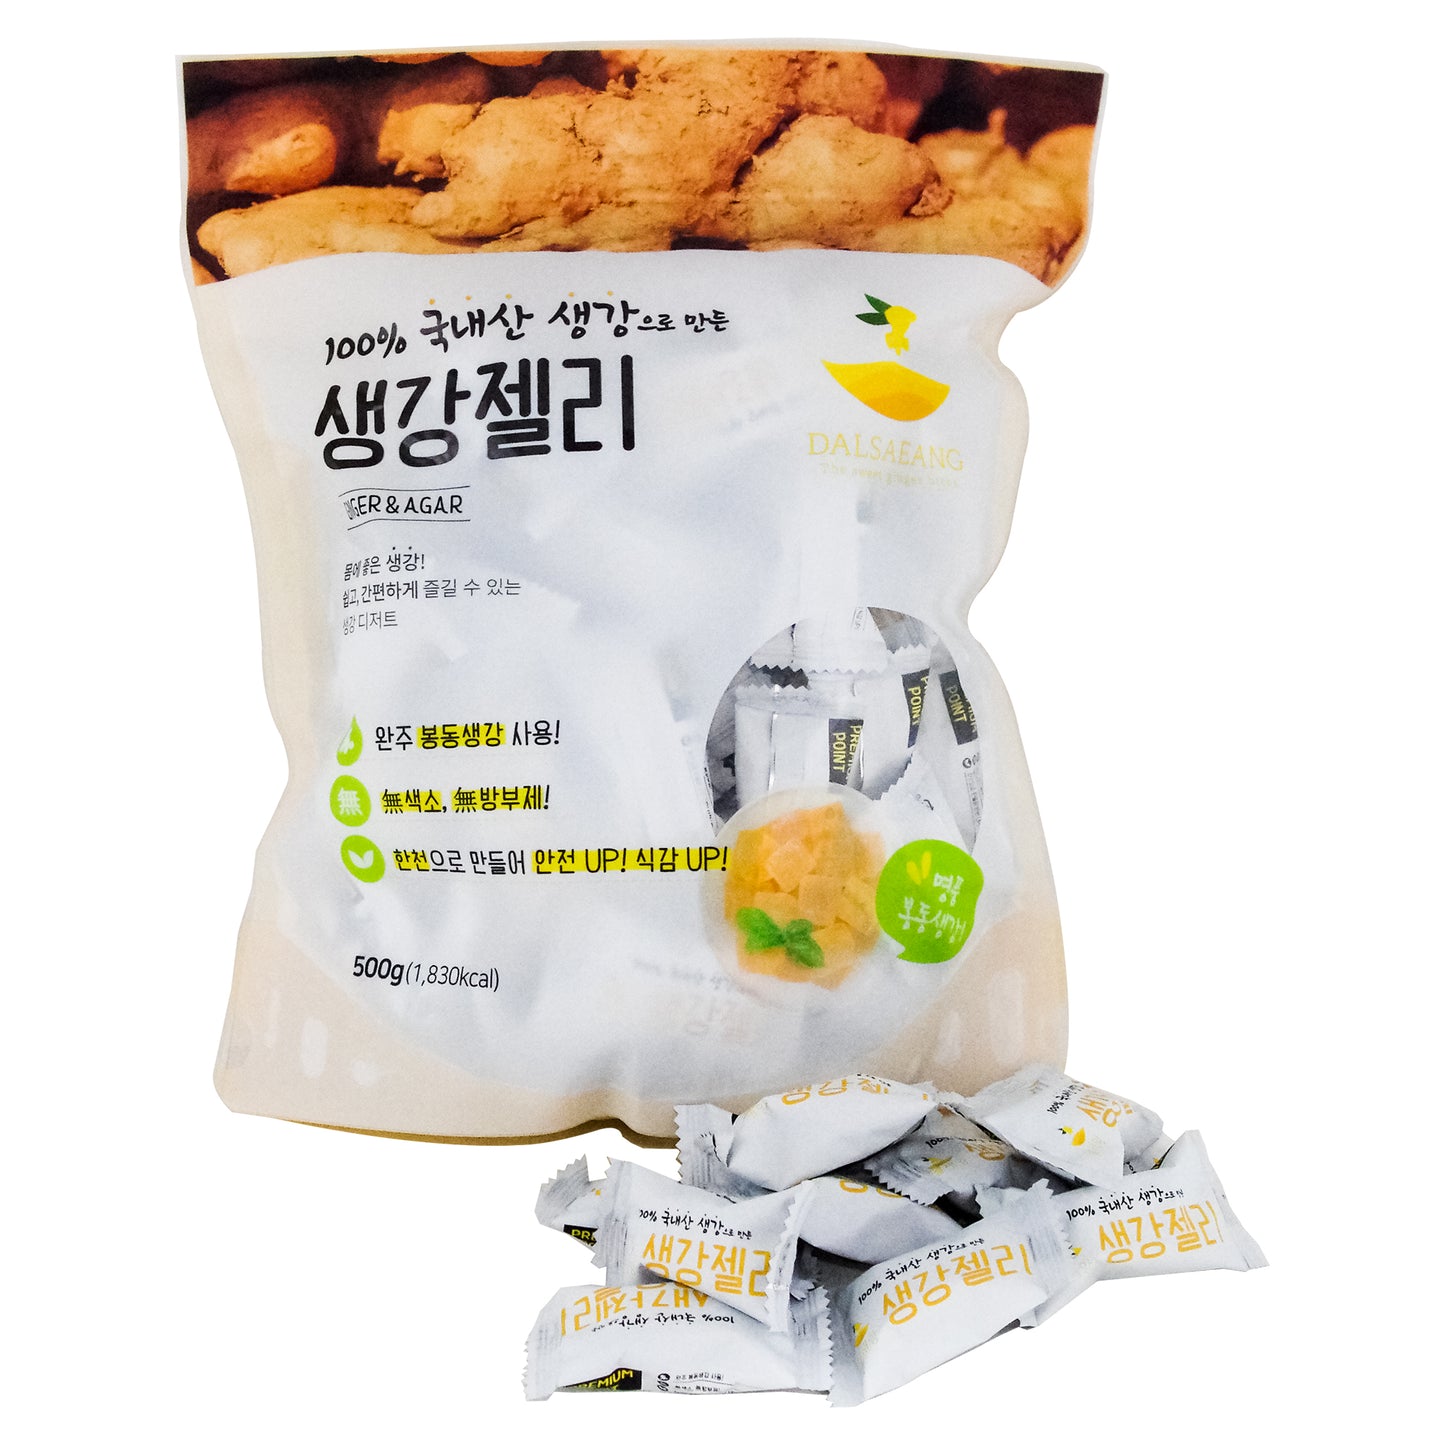 Dalseang Ginger Jelly, 달새앙 생강젤리, 500g, 2 Packs, No Preservatives, No Trans Fat